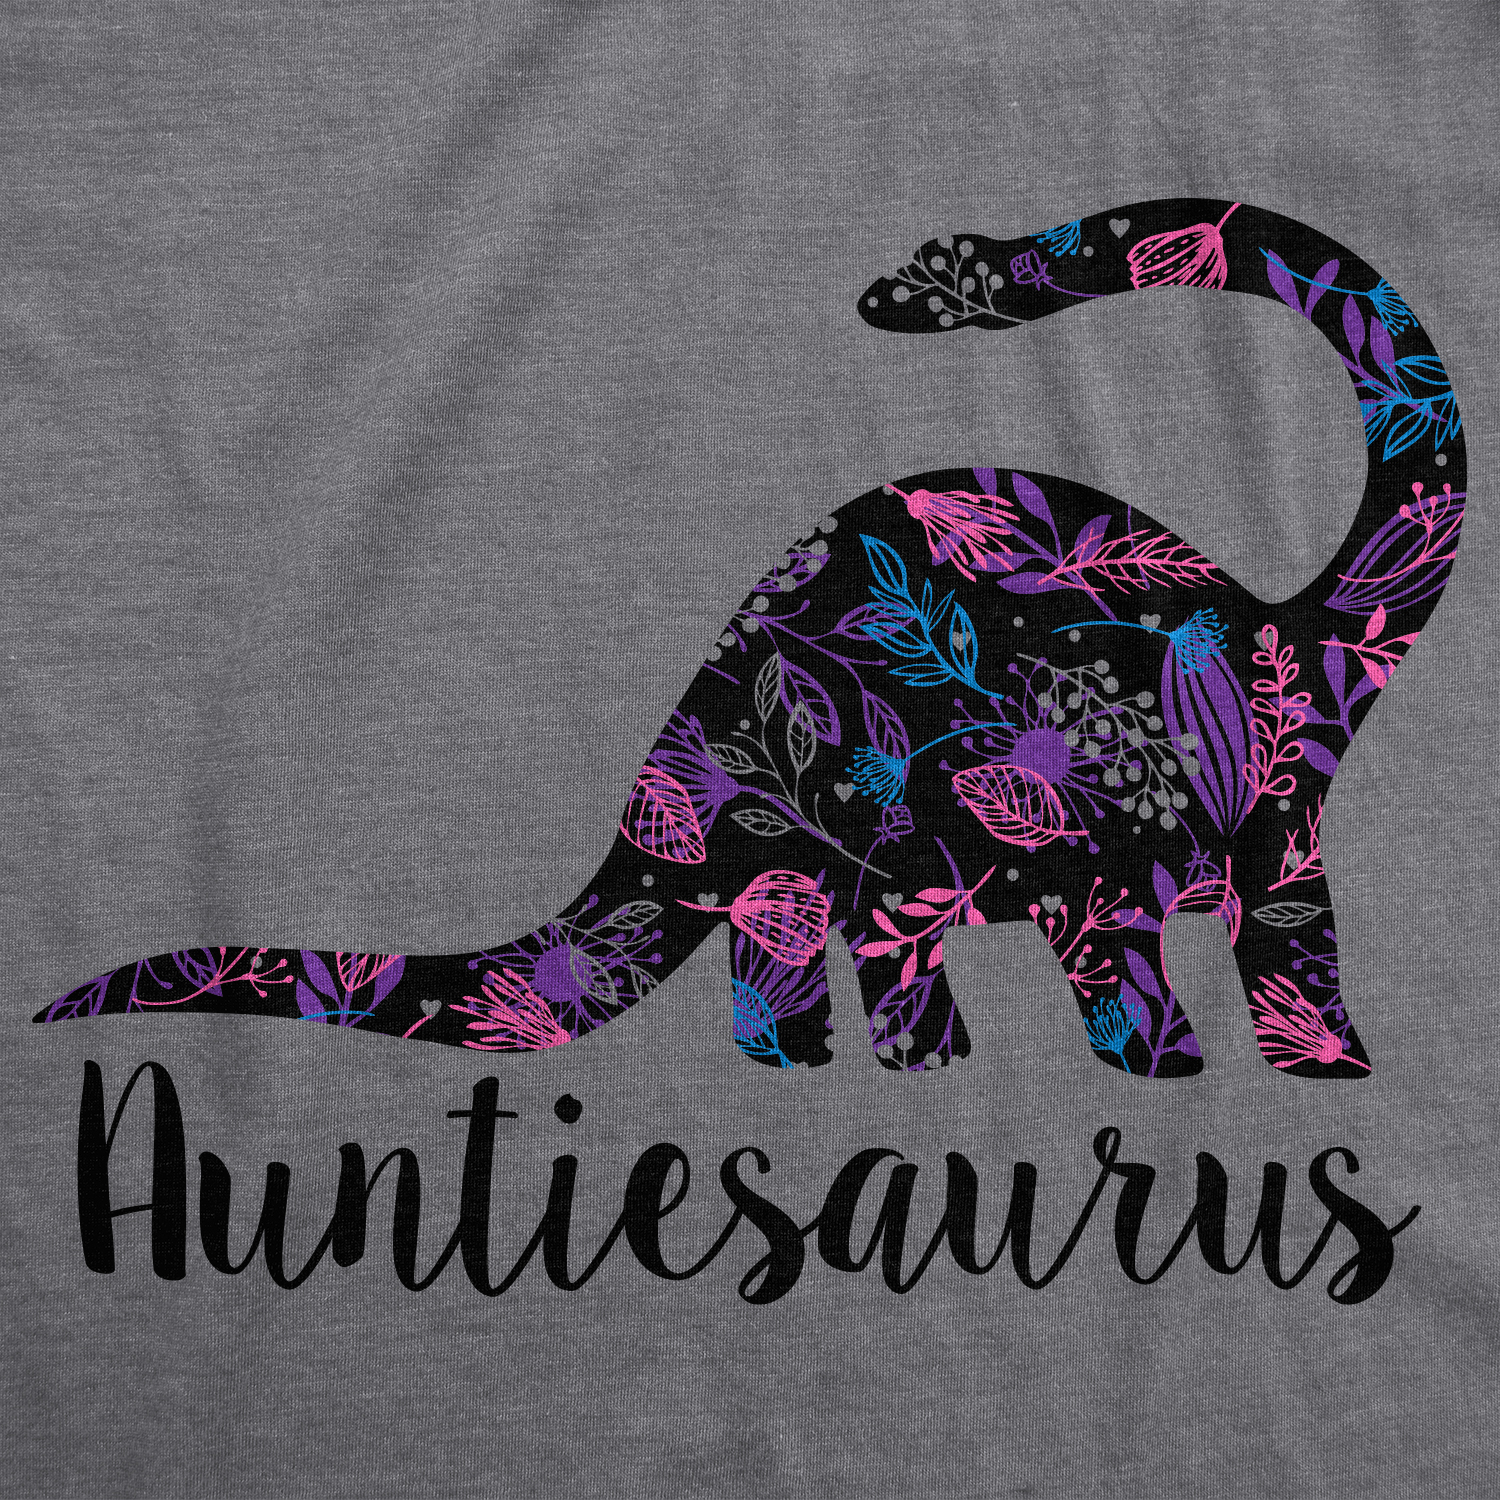 Womens Auntiesaurus T Shirt Funny Kids Gift for Aunt Cute Graphic Dinosaur Top Womens Graphic Tees - image 2 of 10